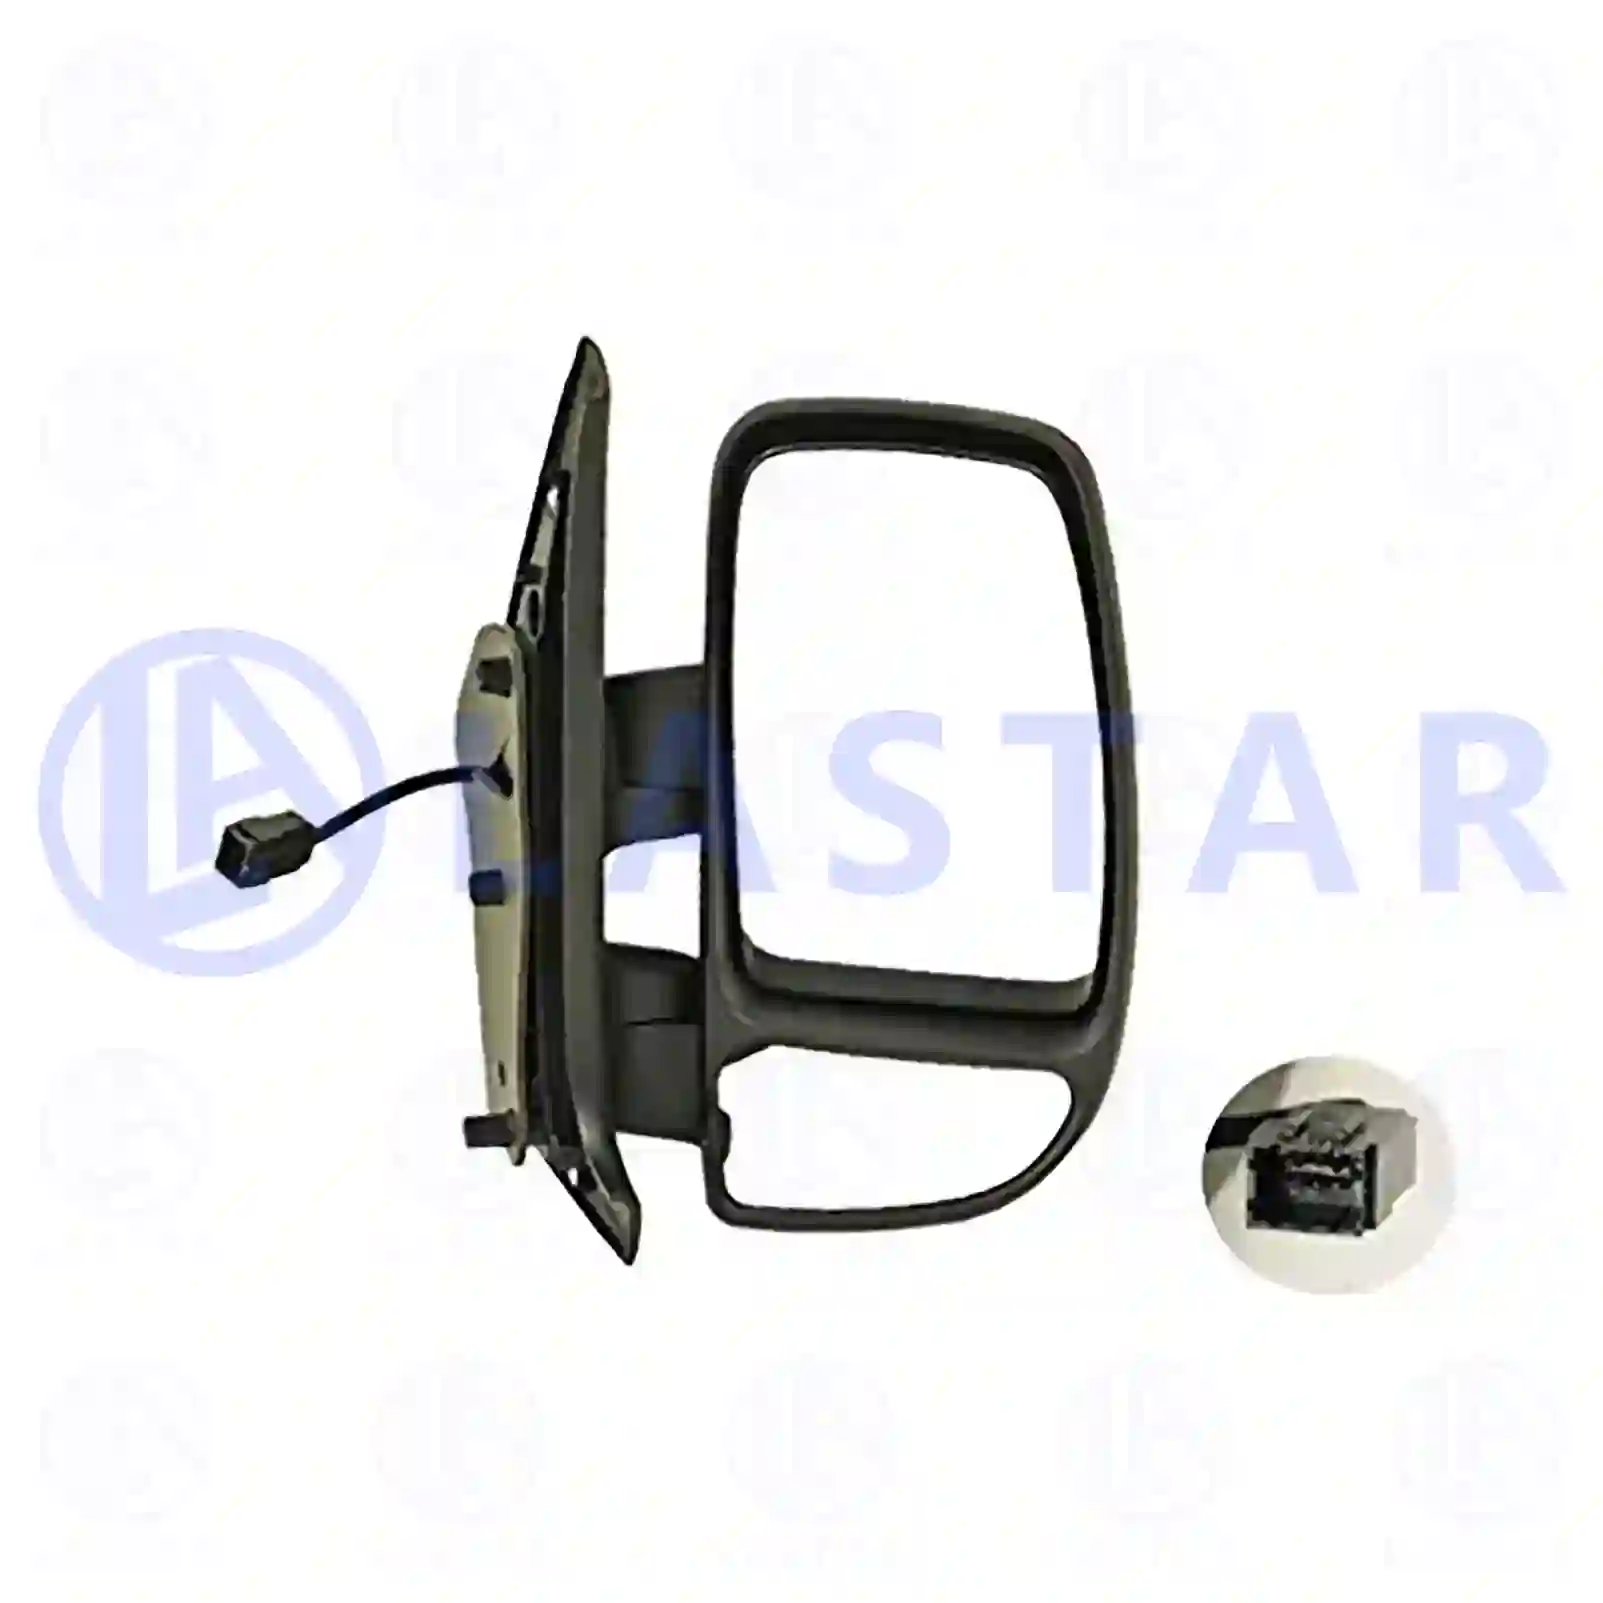 Main mirror, complete, right, heated, electrical, 77720442, 96301-00QAT, 7700352188, 8200270544 ||  77720442 Lastar Spare Part | Truck Spare Parts, Auotomotive Spare Parts Main mirror, complete, right, heated, electrical, 77720442, 96301-00QAT, 7700352188, 8200270544 ||  77720442 Lastar Spare Part | Truck Spare Parts, Auotomotive Spare Parts